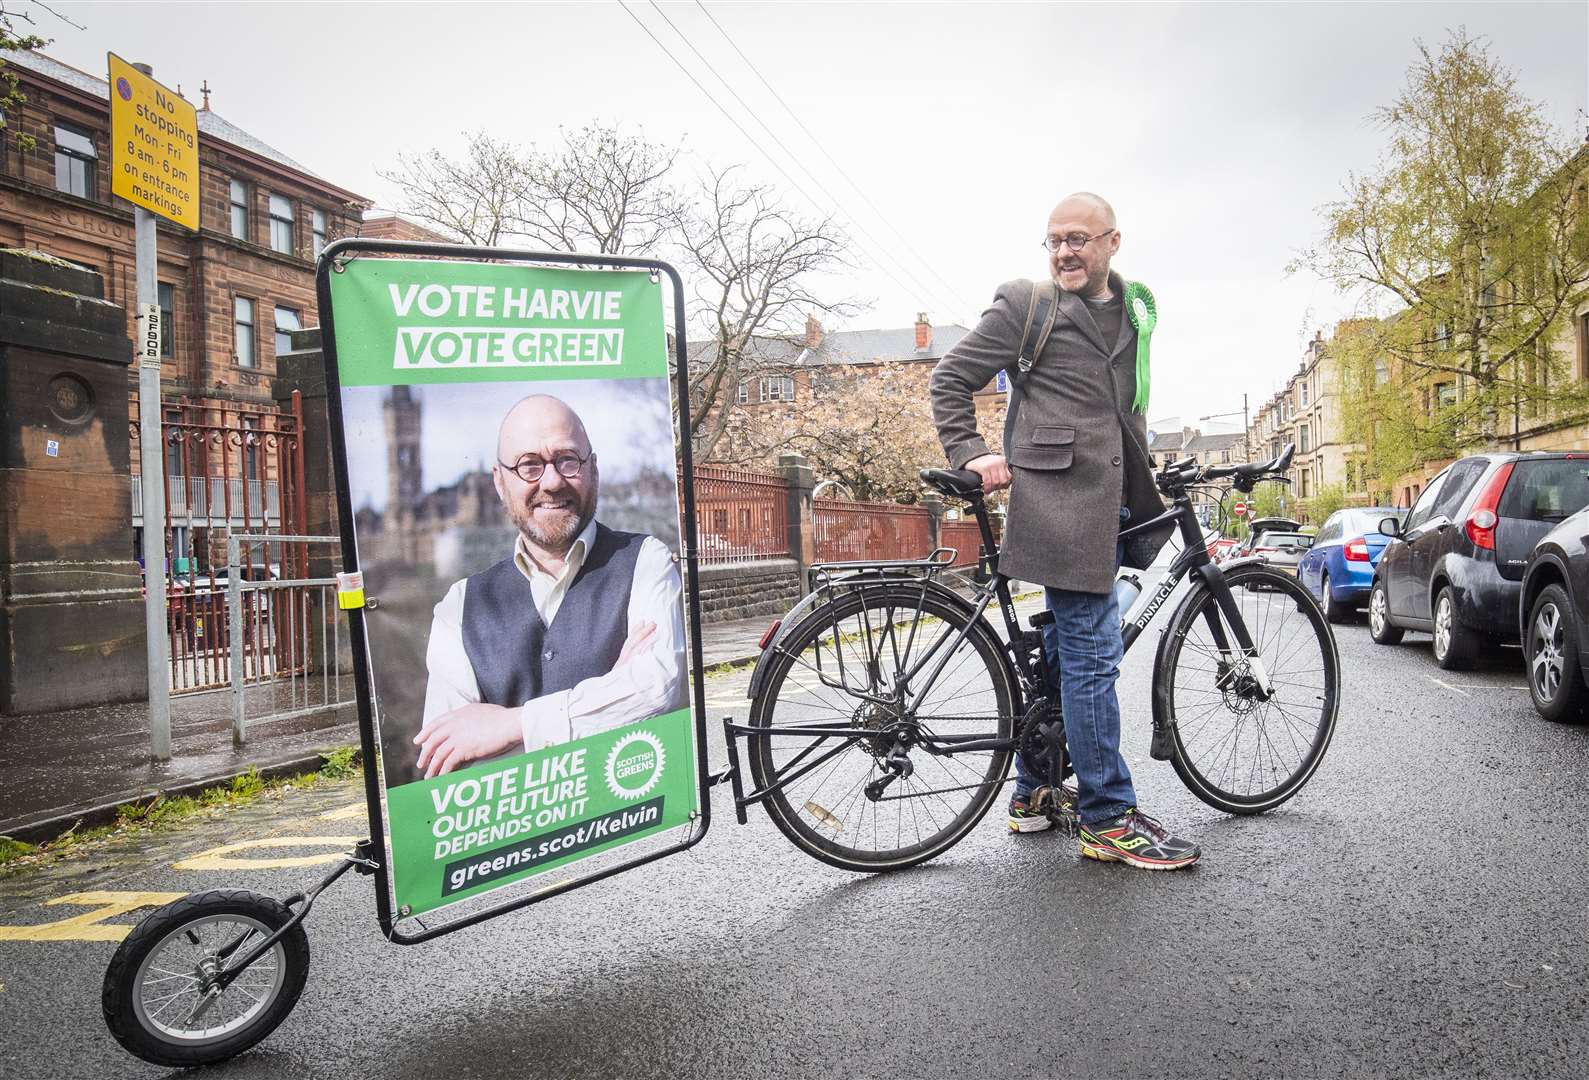 Scottish Greens co-leader Patrick Harvie pulled a billboard featuring his own face as he left his polling station in Glasgow’s west end (Jane Barlow/PA)